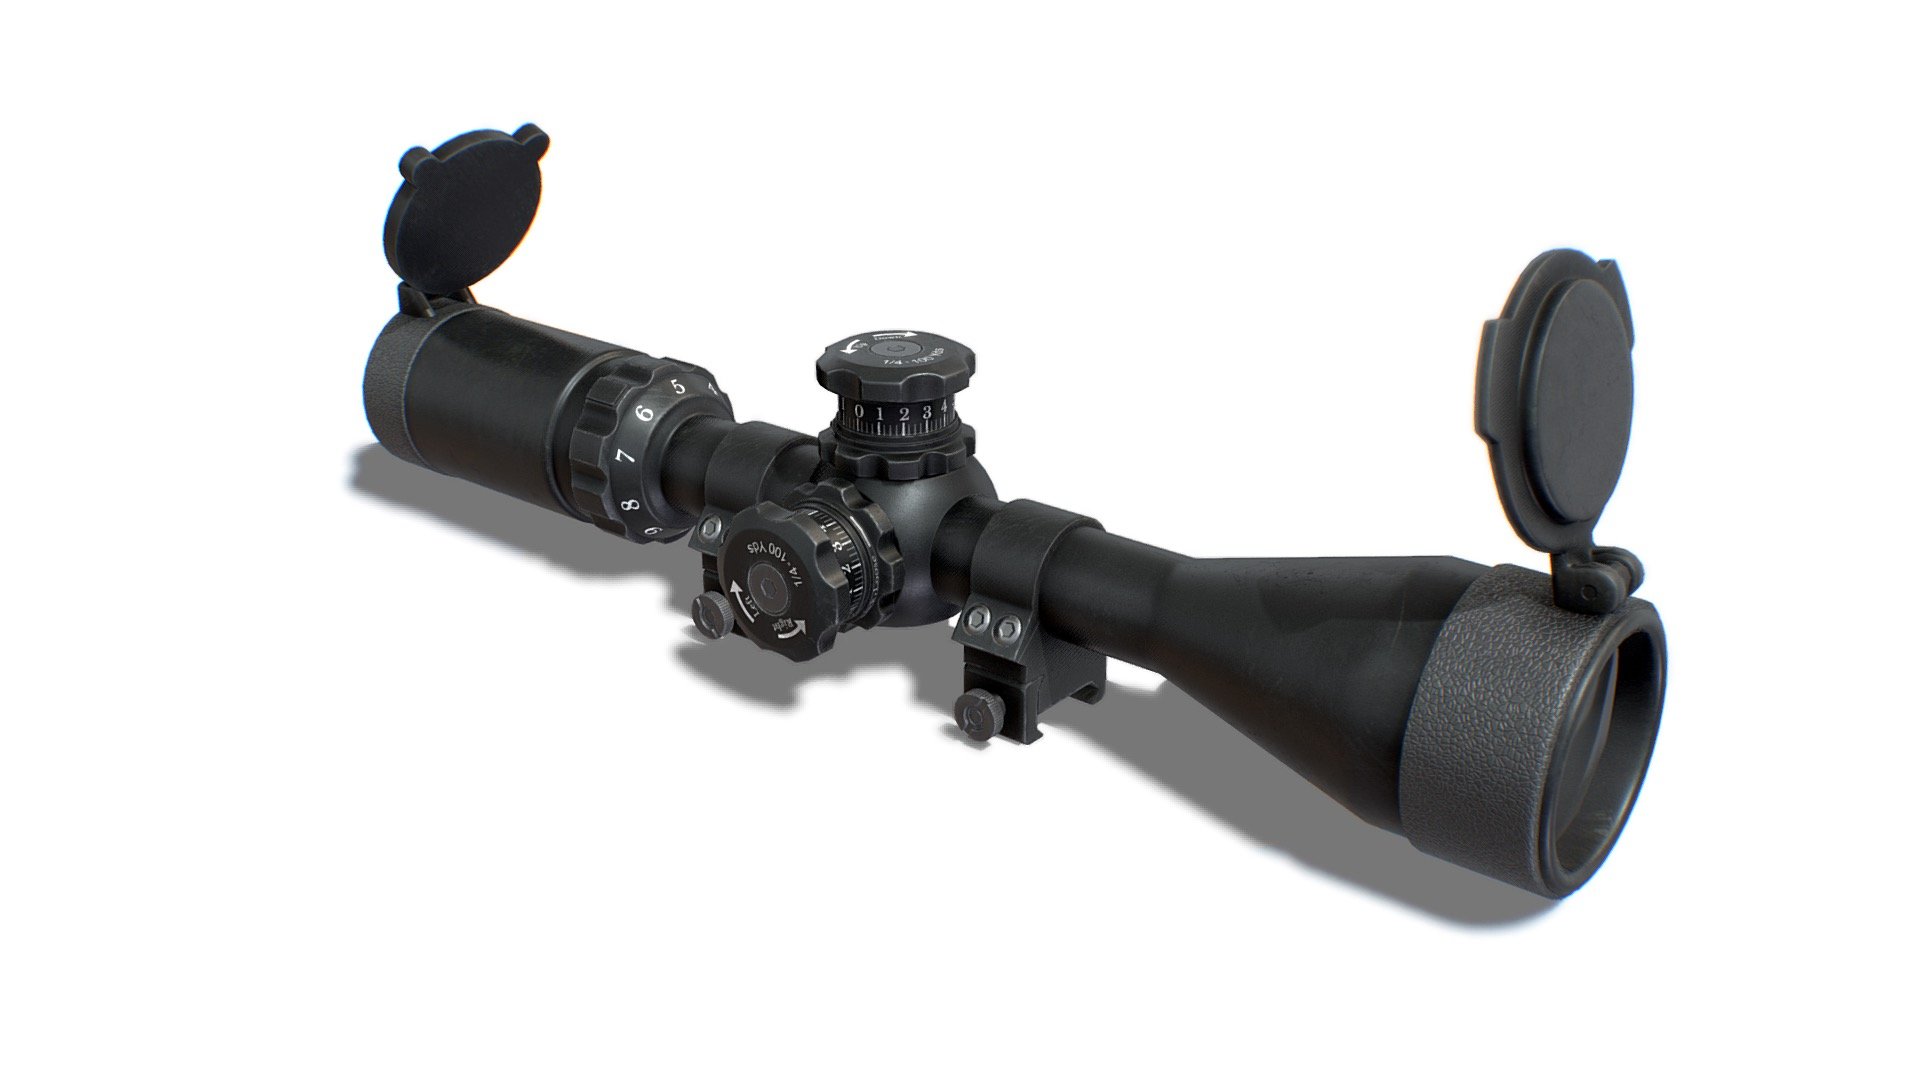 The model looks like a Walther Sniper Scope. All parts of the model were made in full accordance with the original. Each dynamical part is separated and has correct pivot points, that allow easy animation and use in games. 

Advanced information:
- single material for whole mesh;
- set of 4K PBR textures;
- set of 4K Unreal PBR textures;
- set of 4K Unity PBR textures;
- set of 4K CryEngine PBR textures;
- FBX, DAE, ABC, OBJ and X3D file formats;
- 4 level of details;

Mesh details:
LOD0 - 7428
LOD1 - 3713
LOD2 - 1855
LOD3 - 299 - Sniper Scope - 3D model by FreakGames 3d model